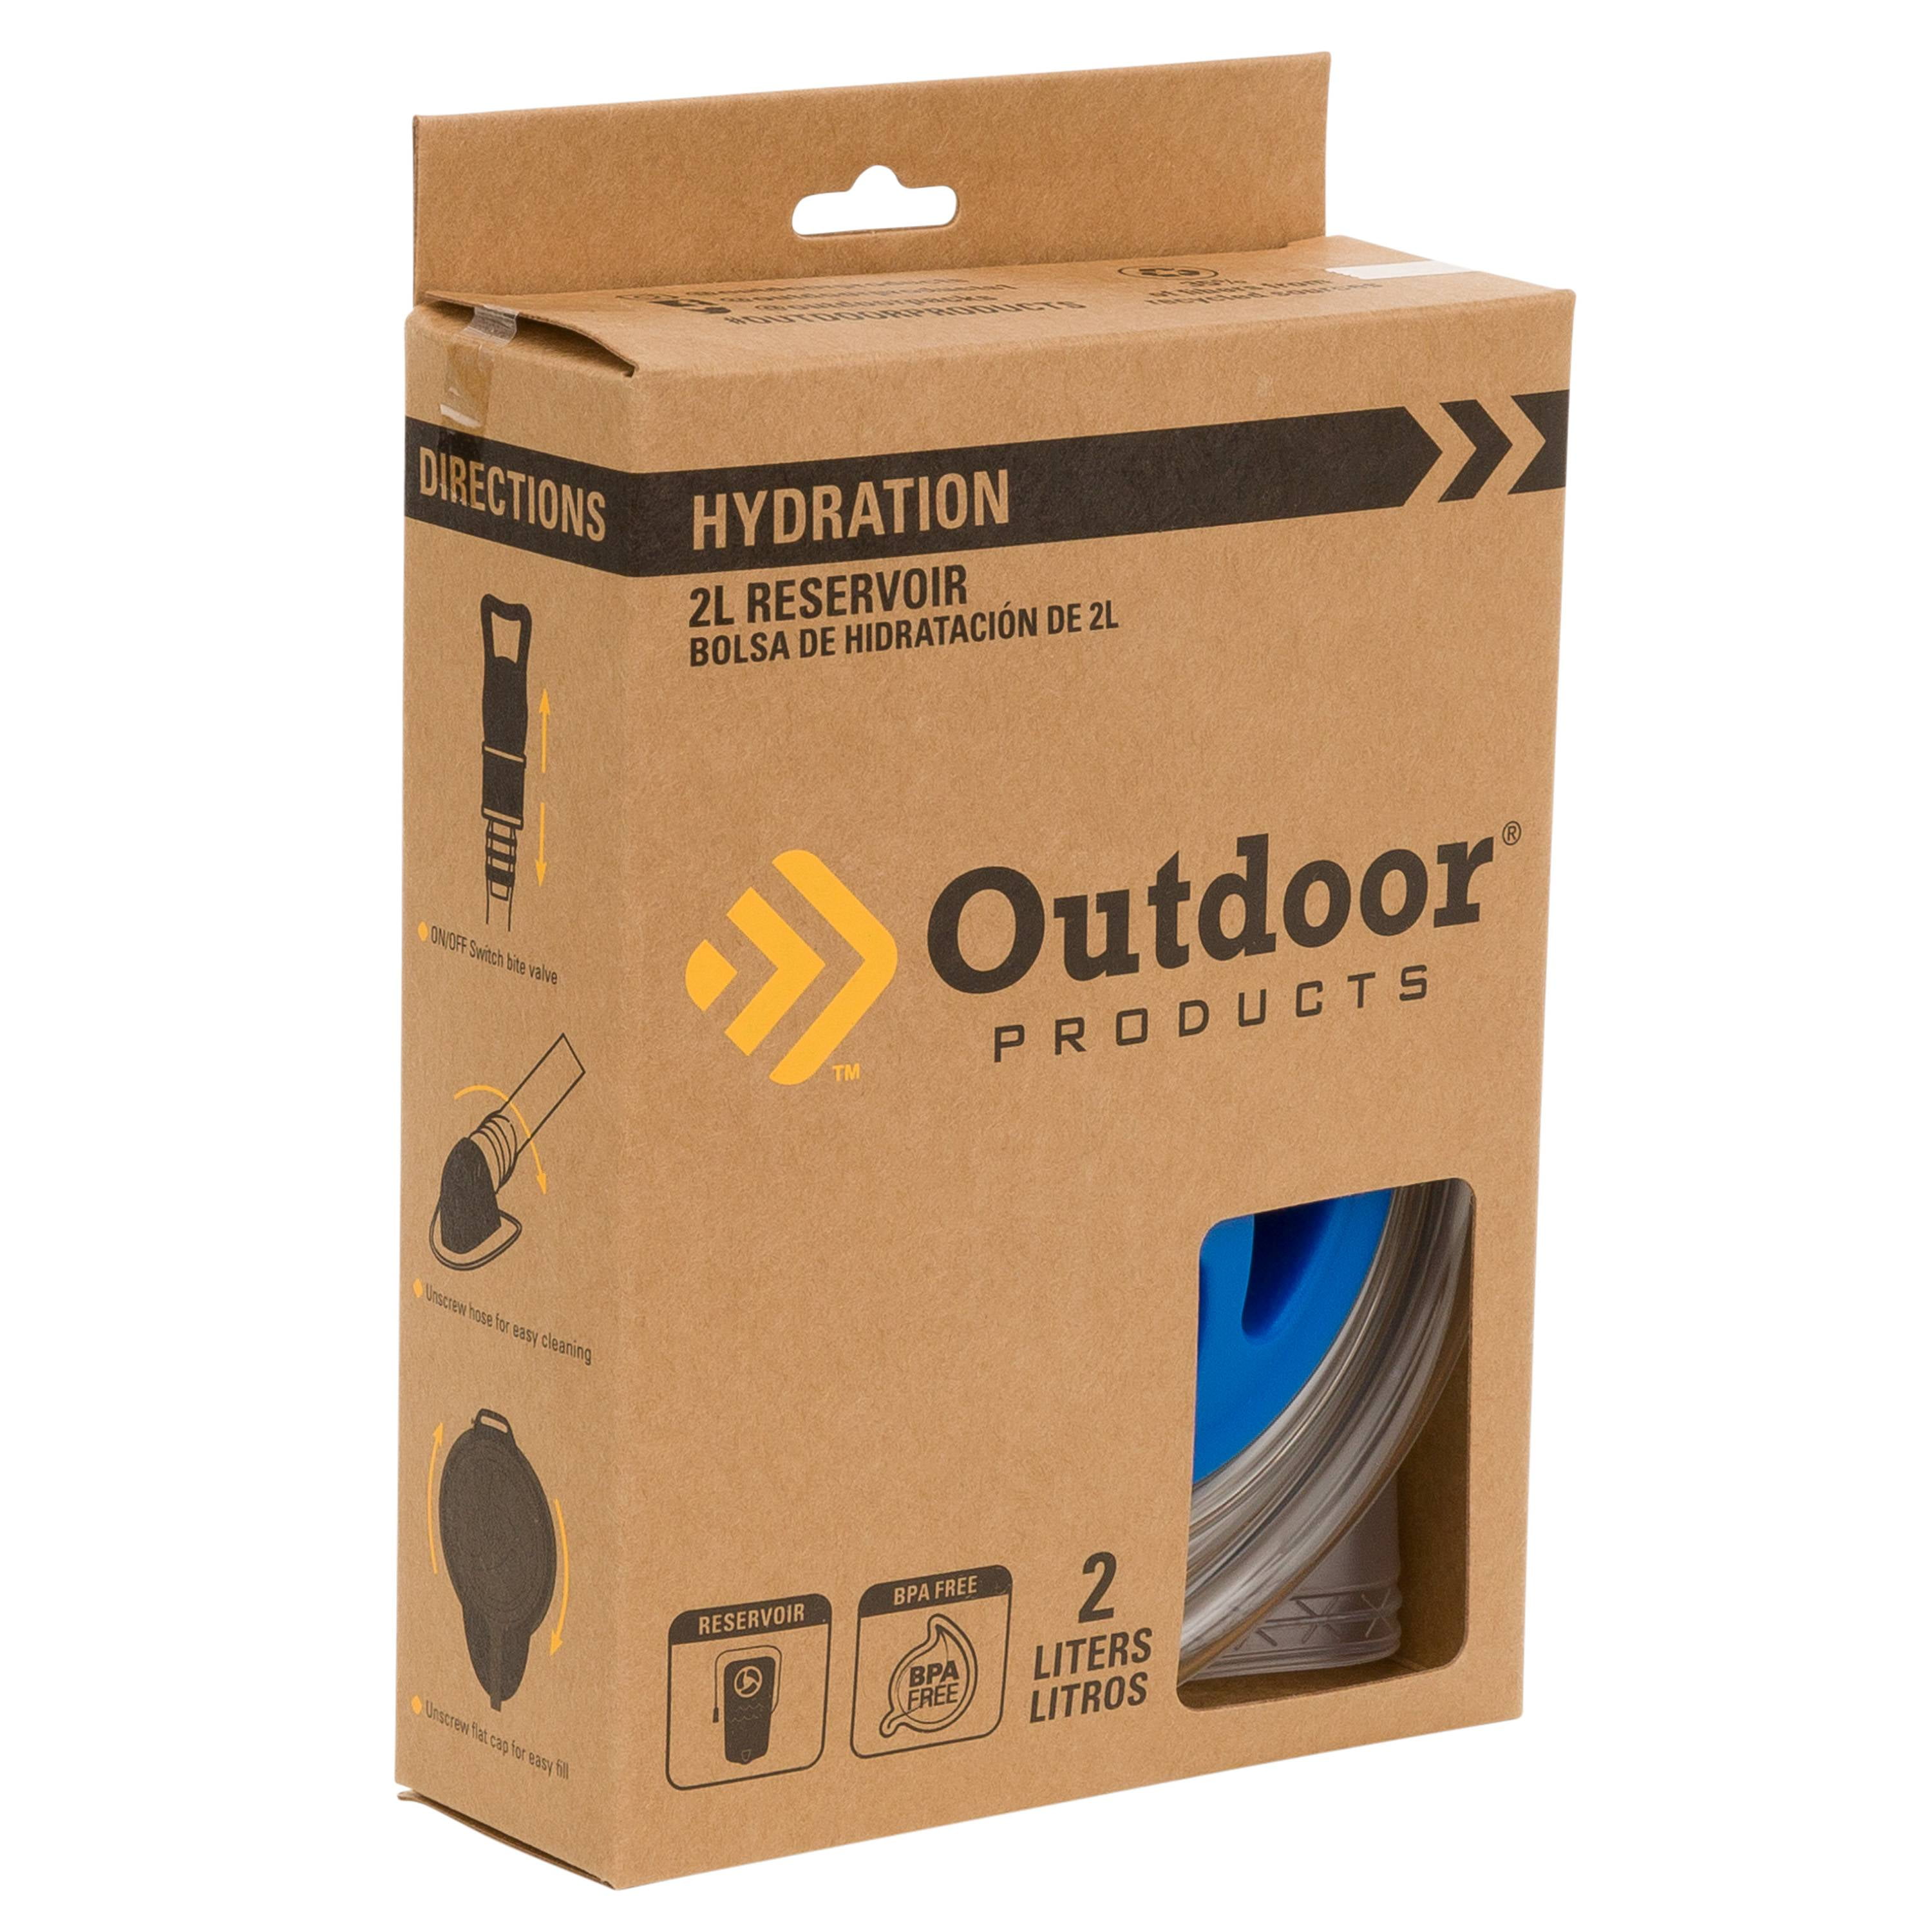 Outdoor Products 2 Liter Hydration Reservoir 2.0 